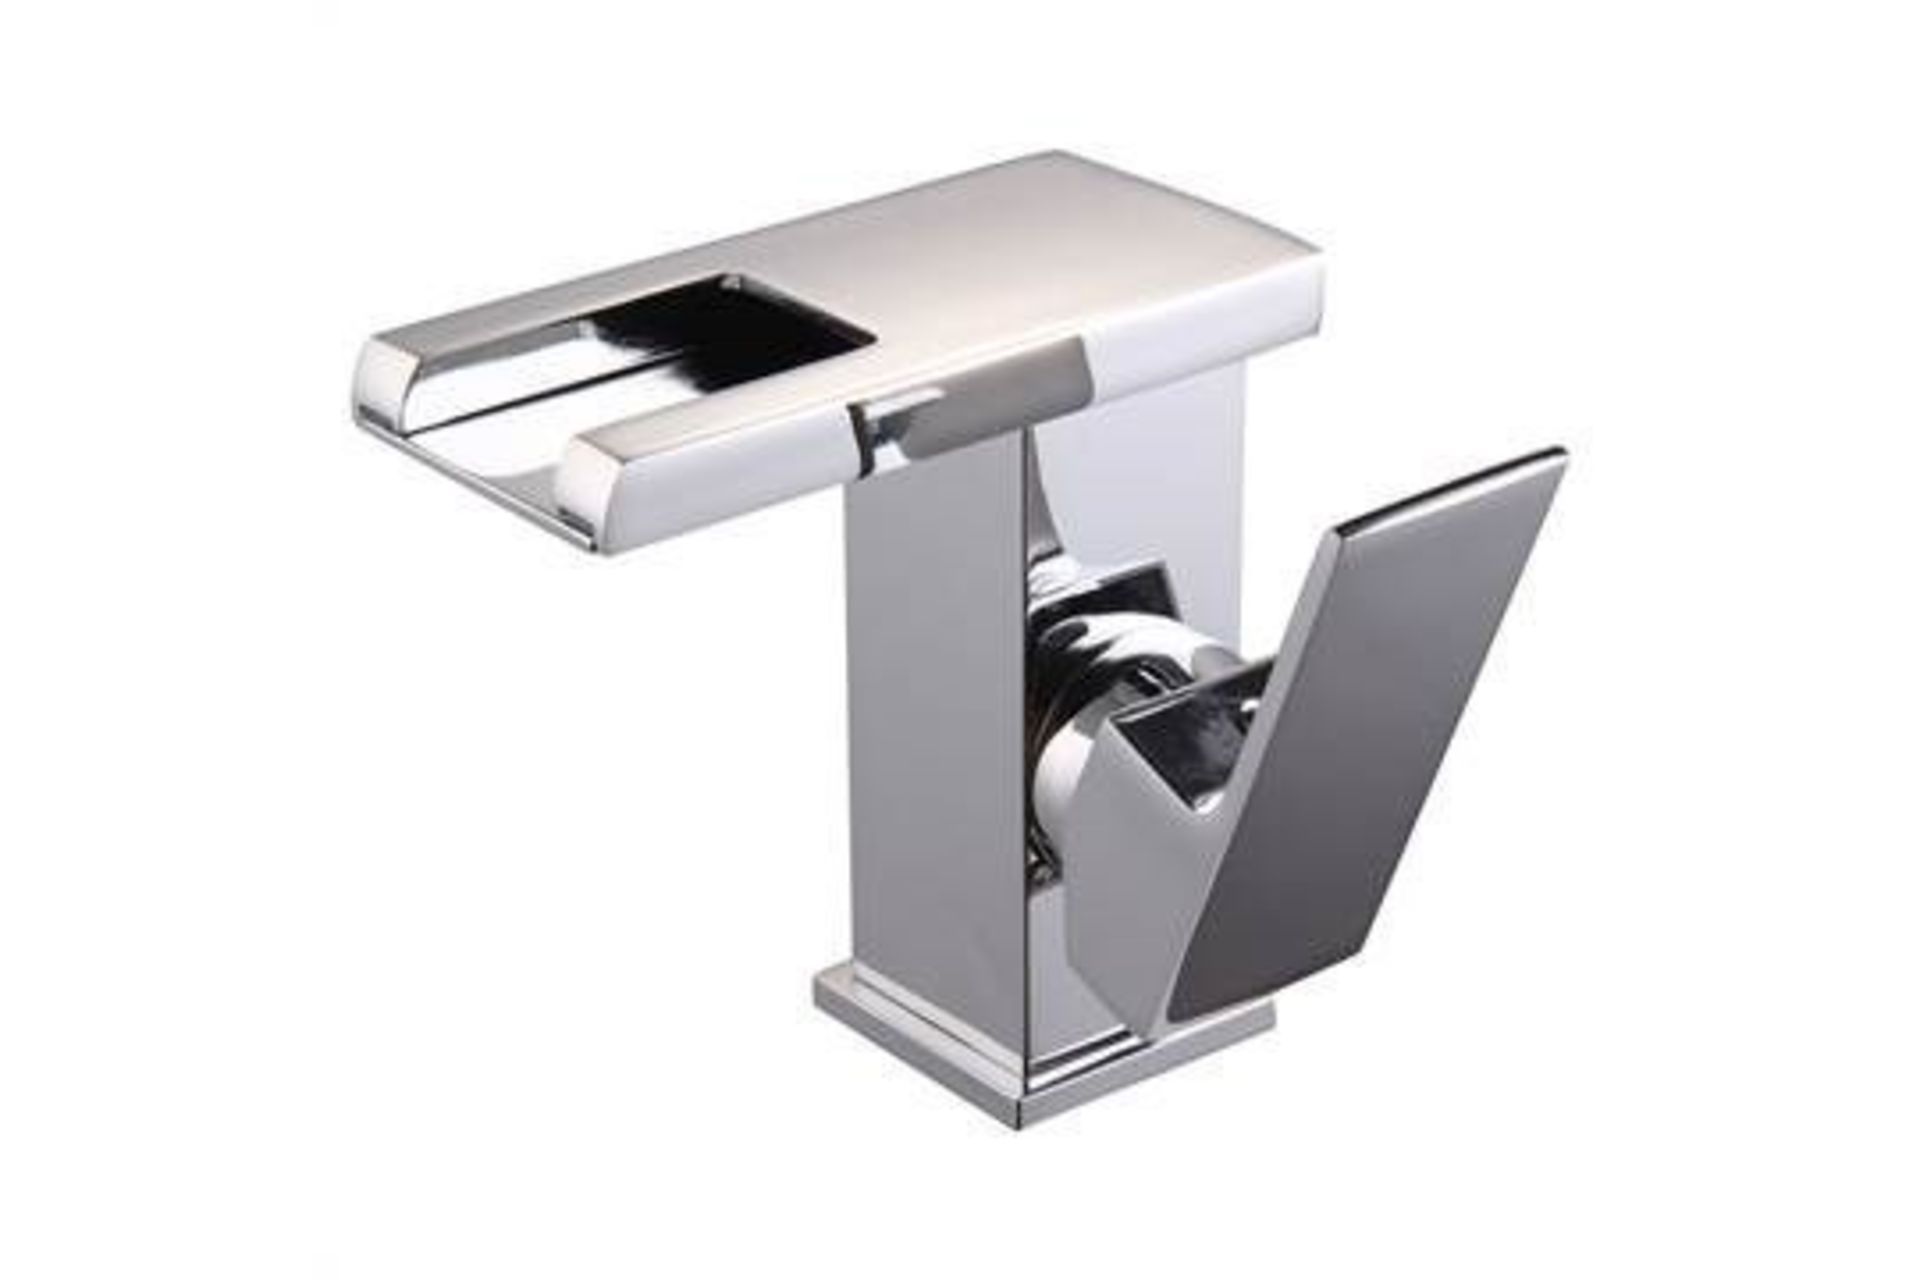 NEW & BOXED LED Waterfall Bathroom Basin Mixer Tap. RRP £229.99.Easy to install and clean.All ... - Image 2 of 2